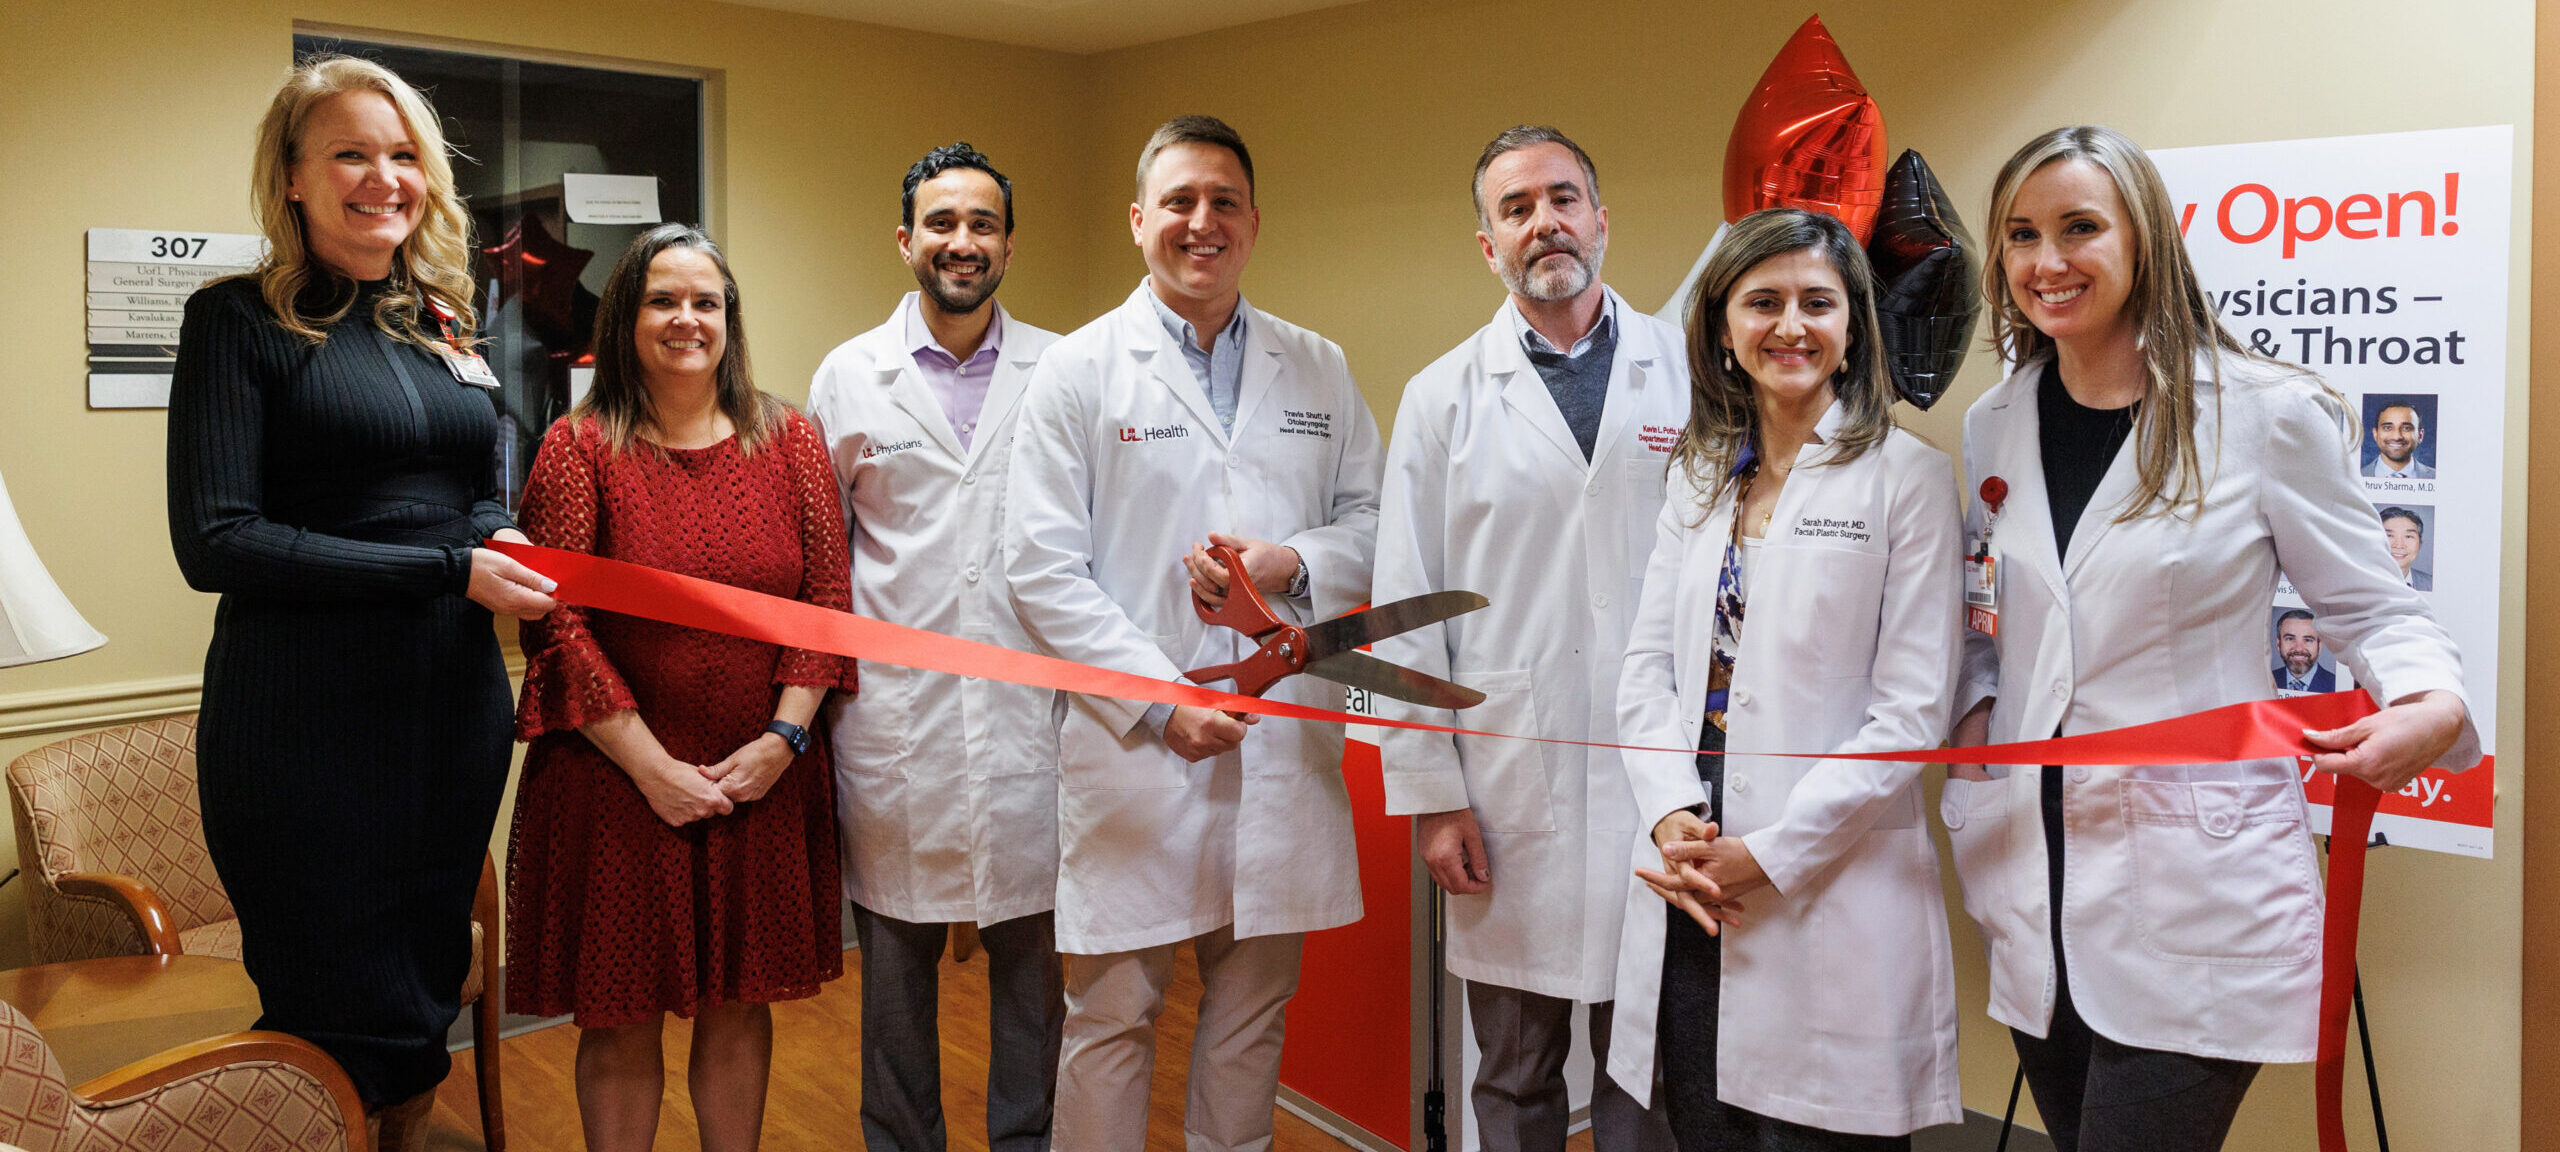 Ear, Nose & Throat (ENT) physicians in white lab coats holding red ribbon and large scissors.